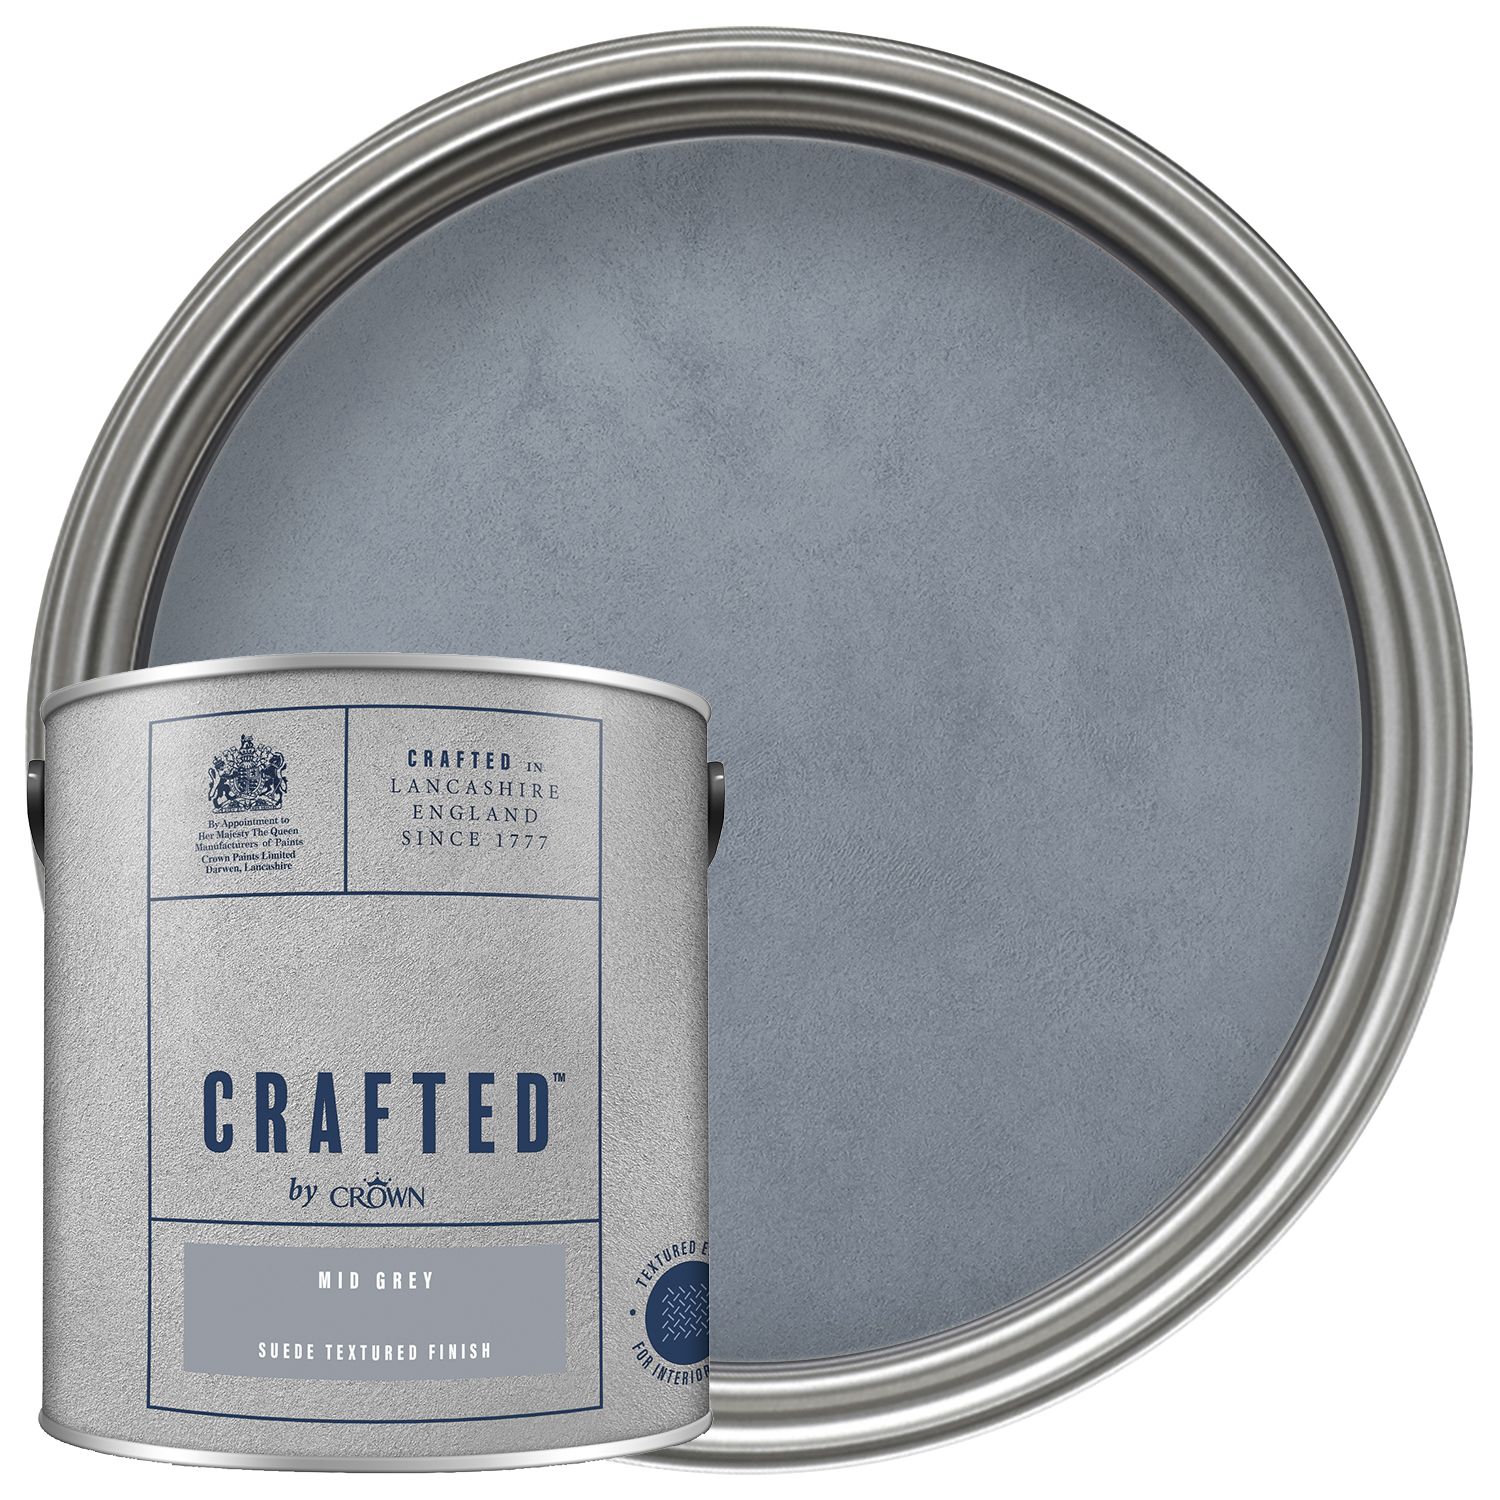 CRAFTED™ by Crown Emulsion Interior Paint - Textured Mid Grey™ - 2.5L